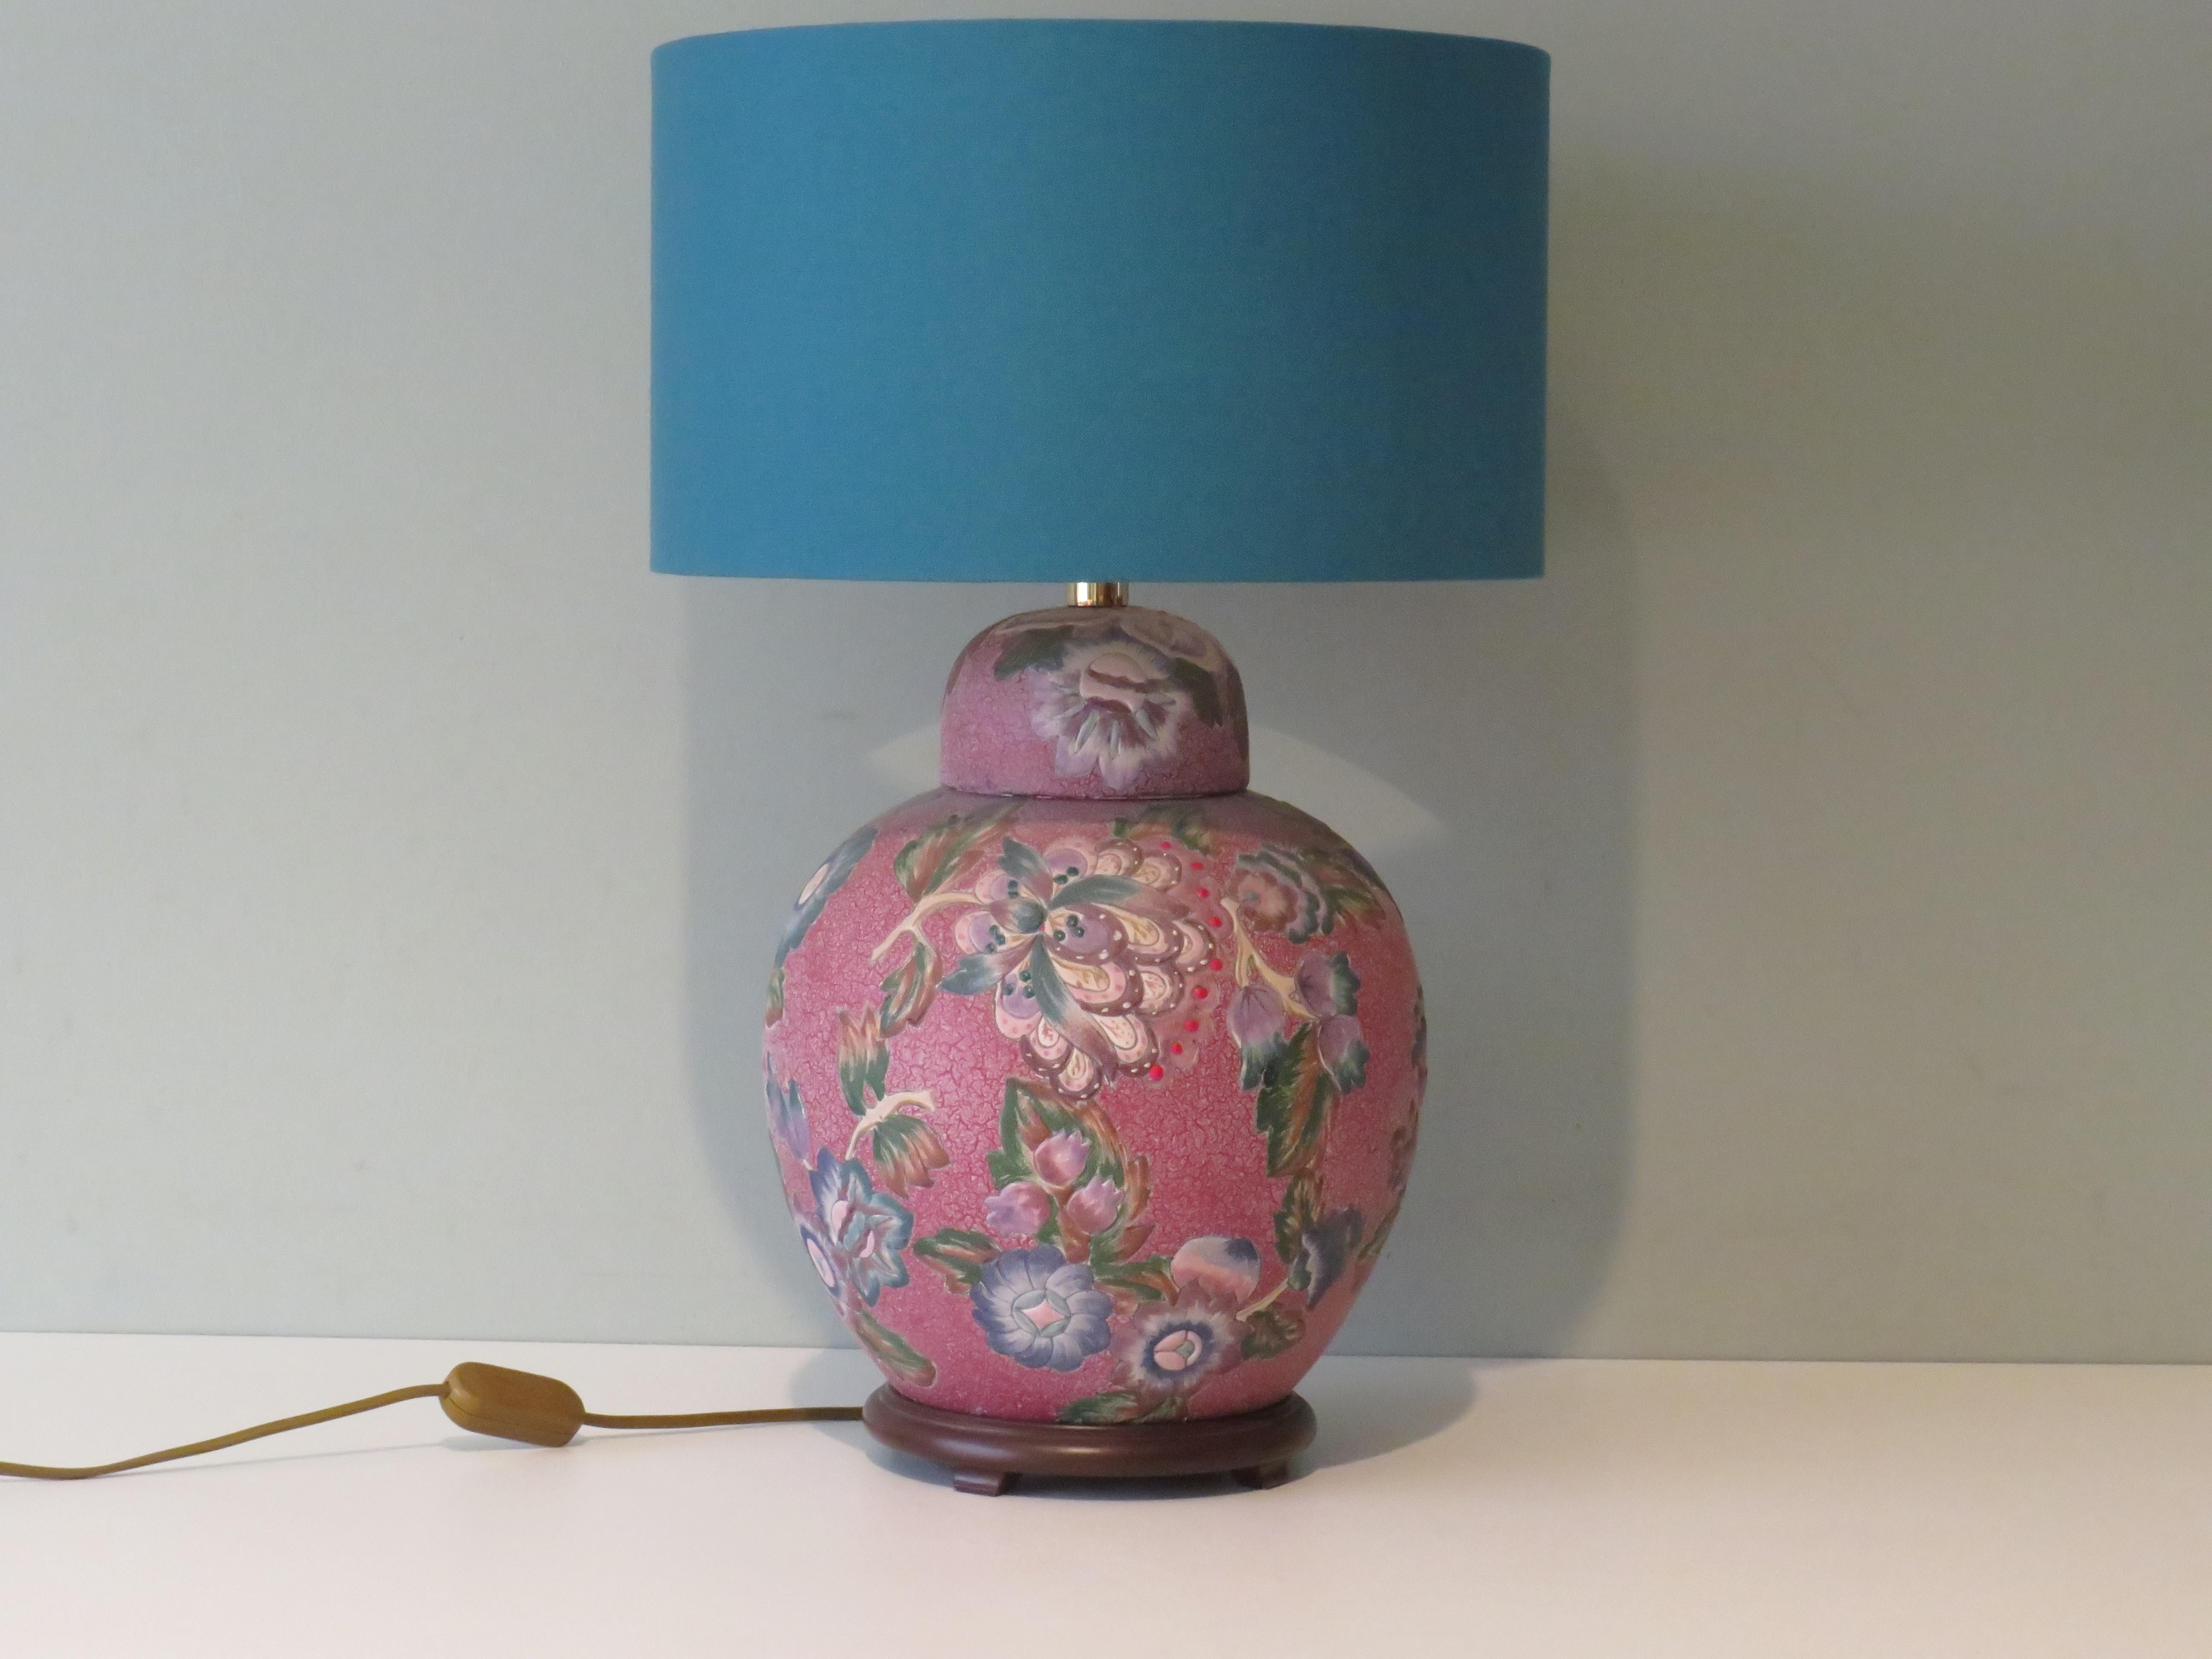 The ceramic lamp base with floral motif is fitted with a new, round, custom-made and handmade lampshade in blue-green fabric.
The lamp is equipped with 1 E 27 fitting and a gold-colored cord with gold-colored on and off button and plug.
The lamp